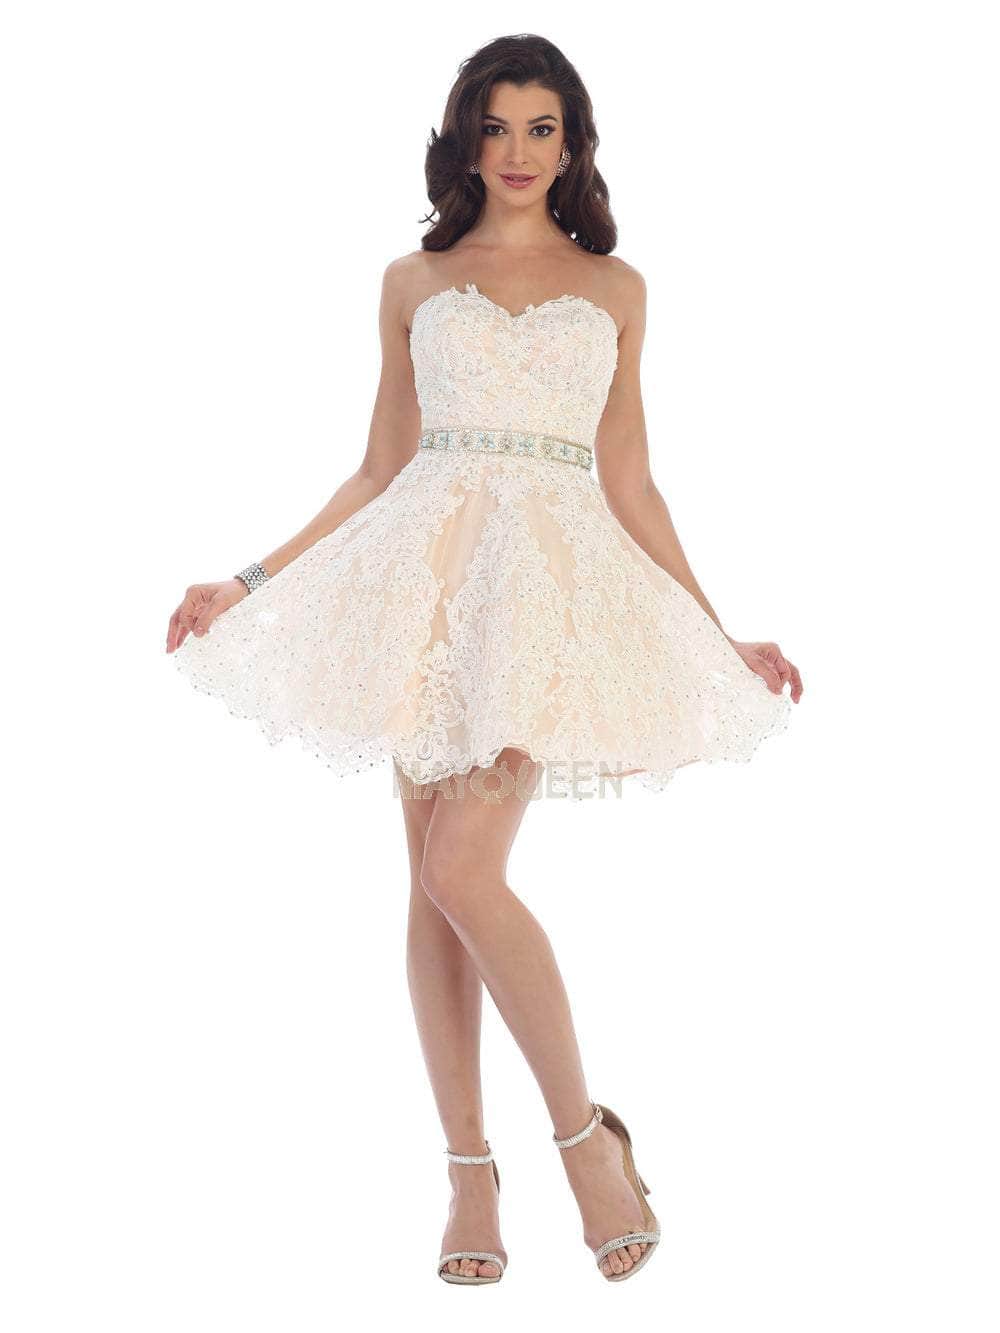 May Queen MQ1461 - Embroidered Lace Cocktail Dress